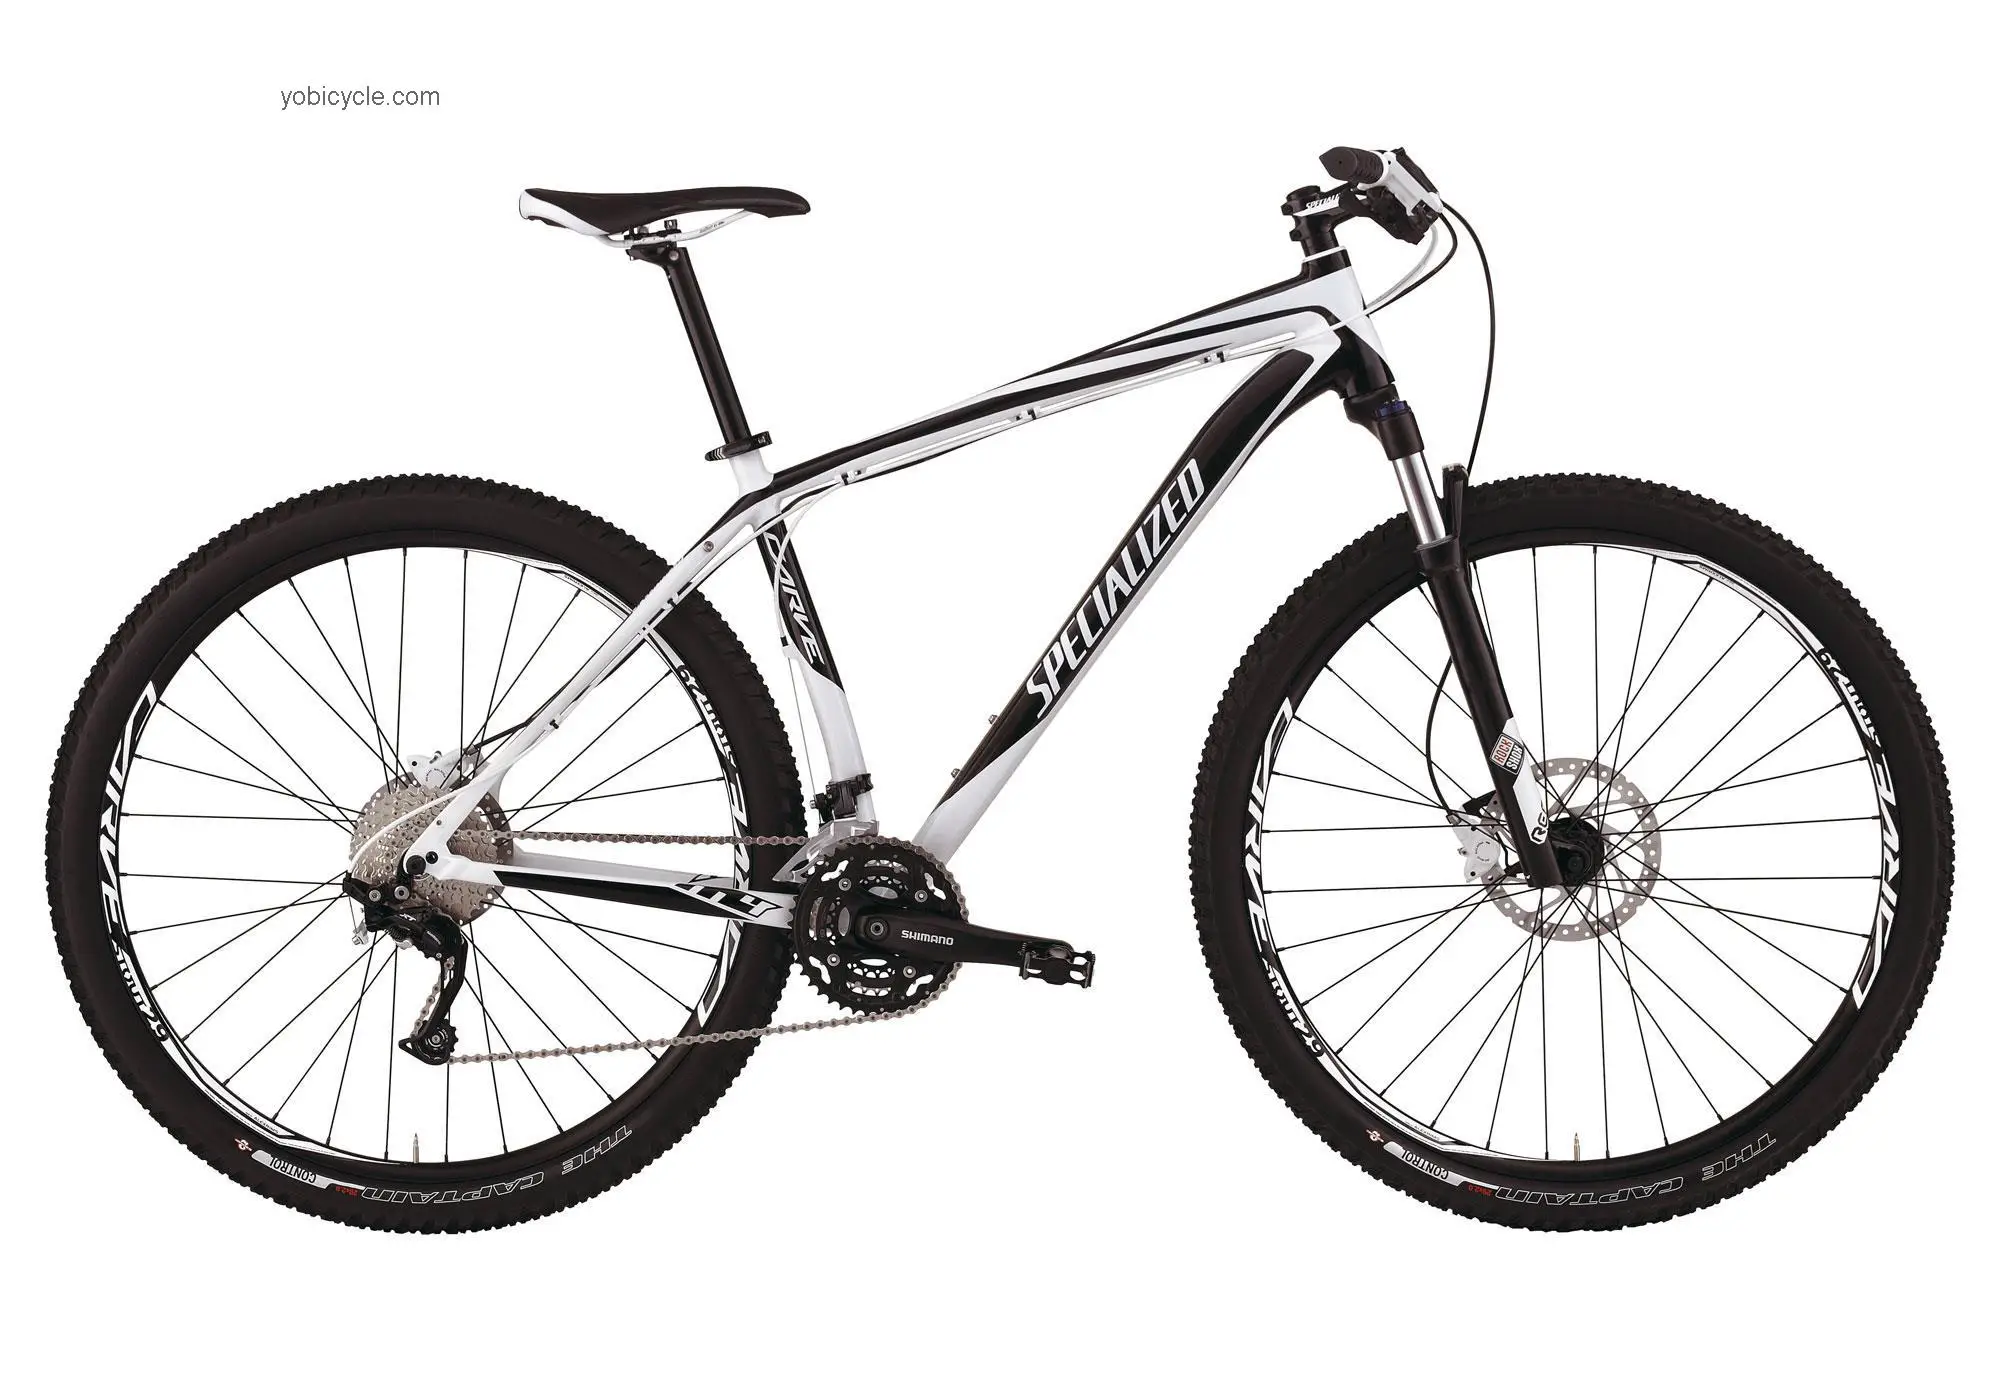 Specialized Carve Expert 29 2012 comparison online with competitors